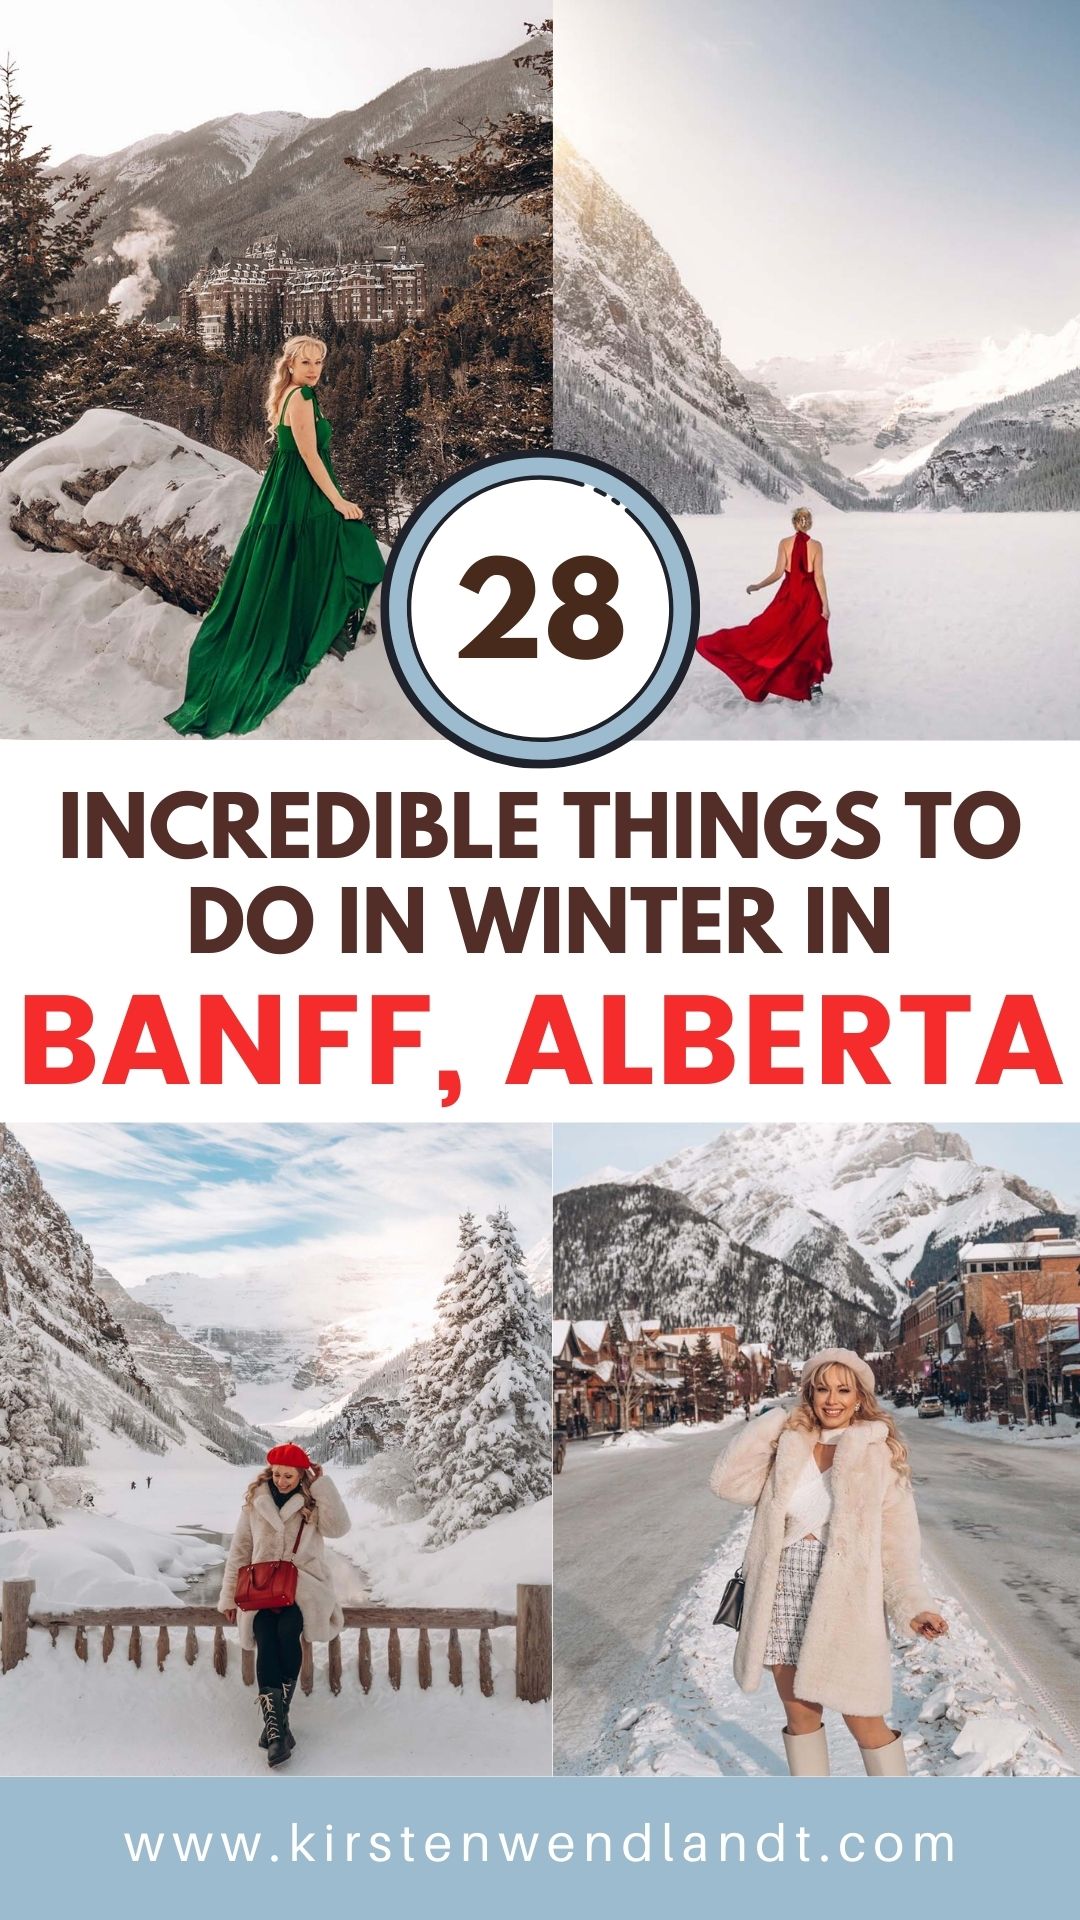 Although most people visit Banff when the weather is warmer, it's absolutely magical to visit in winter. Here's a local's guide to some of the best things to do in in Banff in winter. From hikes and trails to winter sports, family friendly excursions, dining experiences and more. You won't want to miss this guide that will surely convince you to add Banff to your winter travel bucket list.